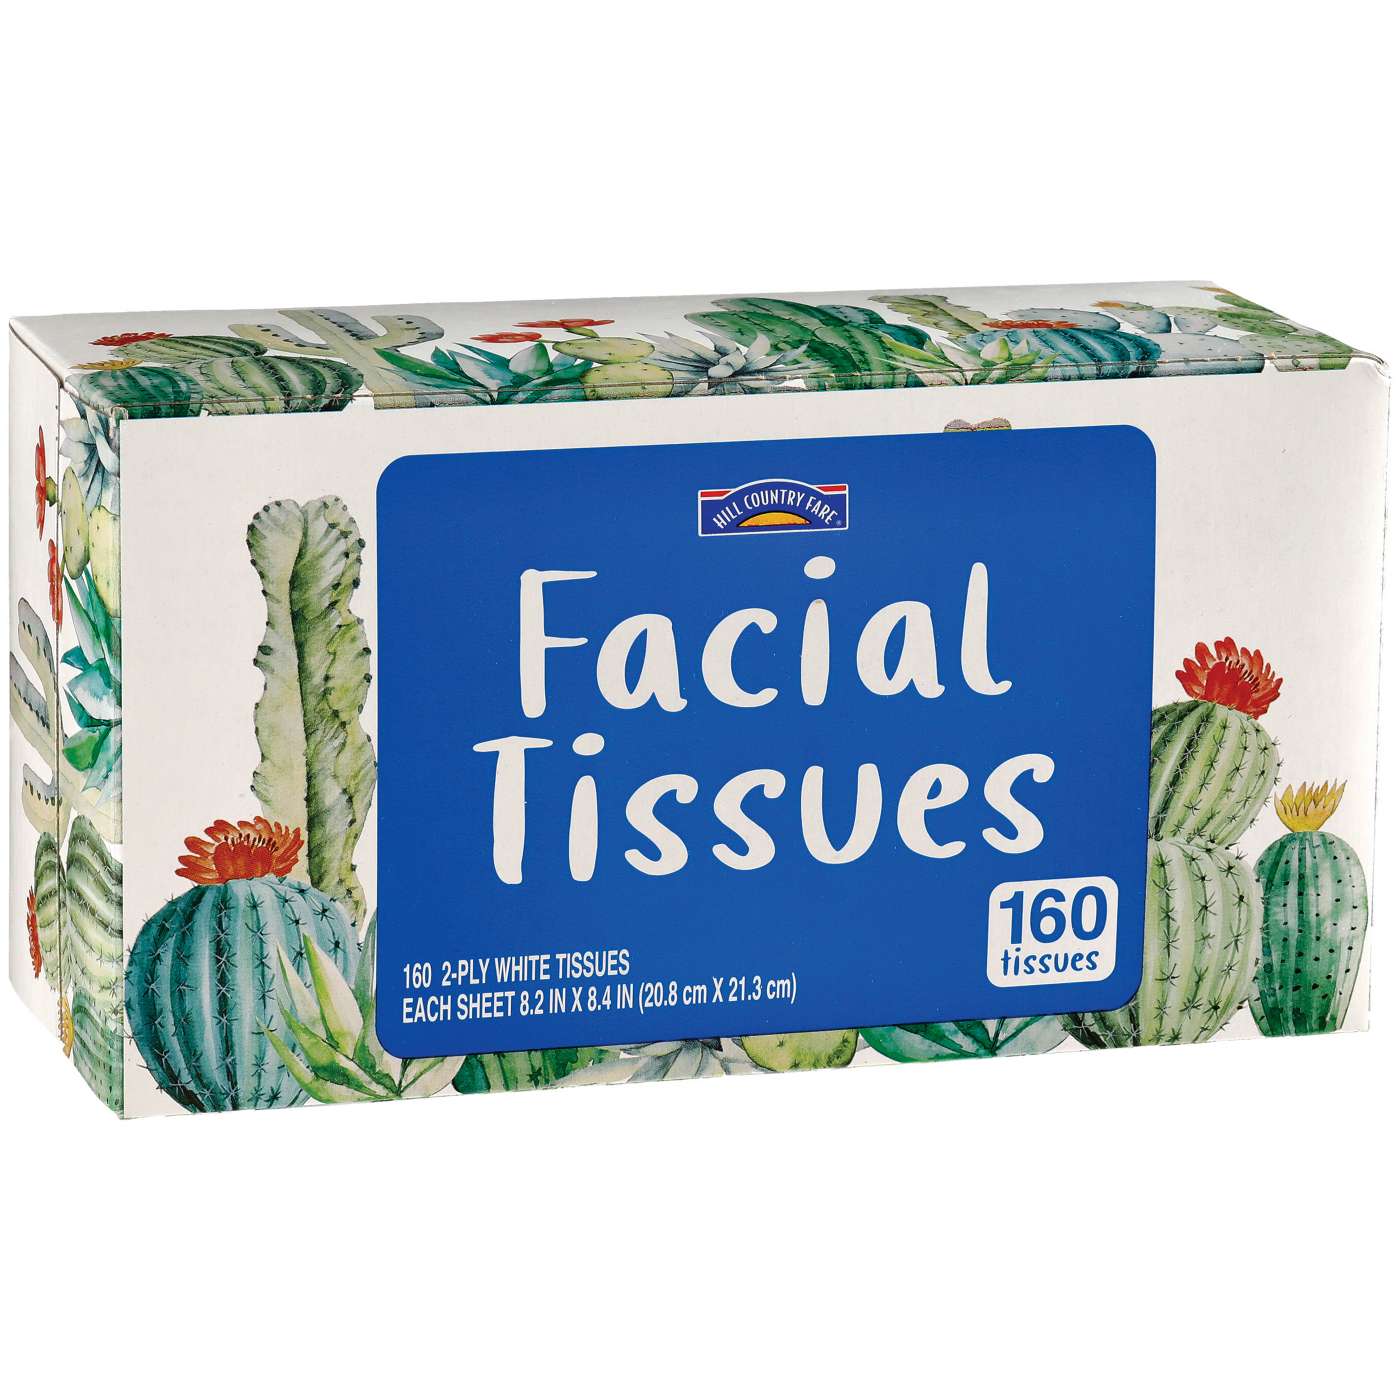 Hill Country Fare Facial Tissues; image 1 of 4